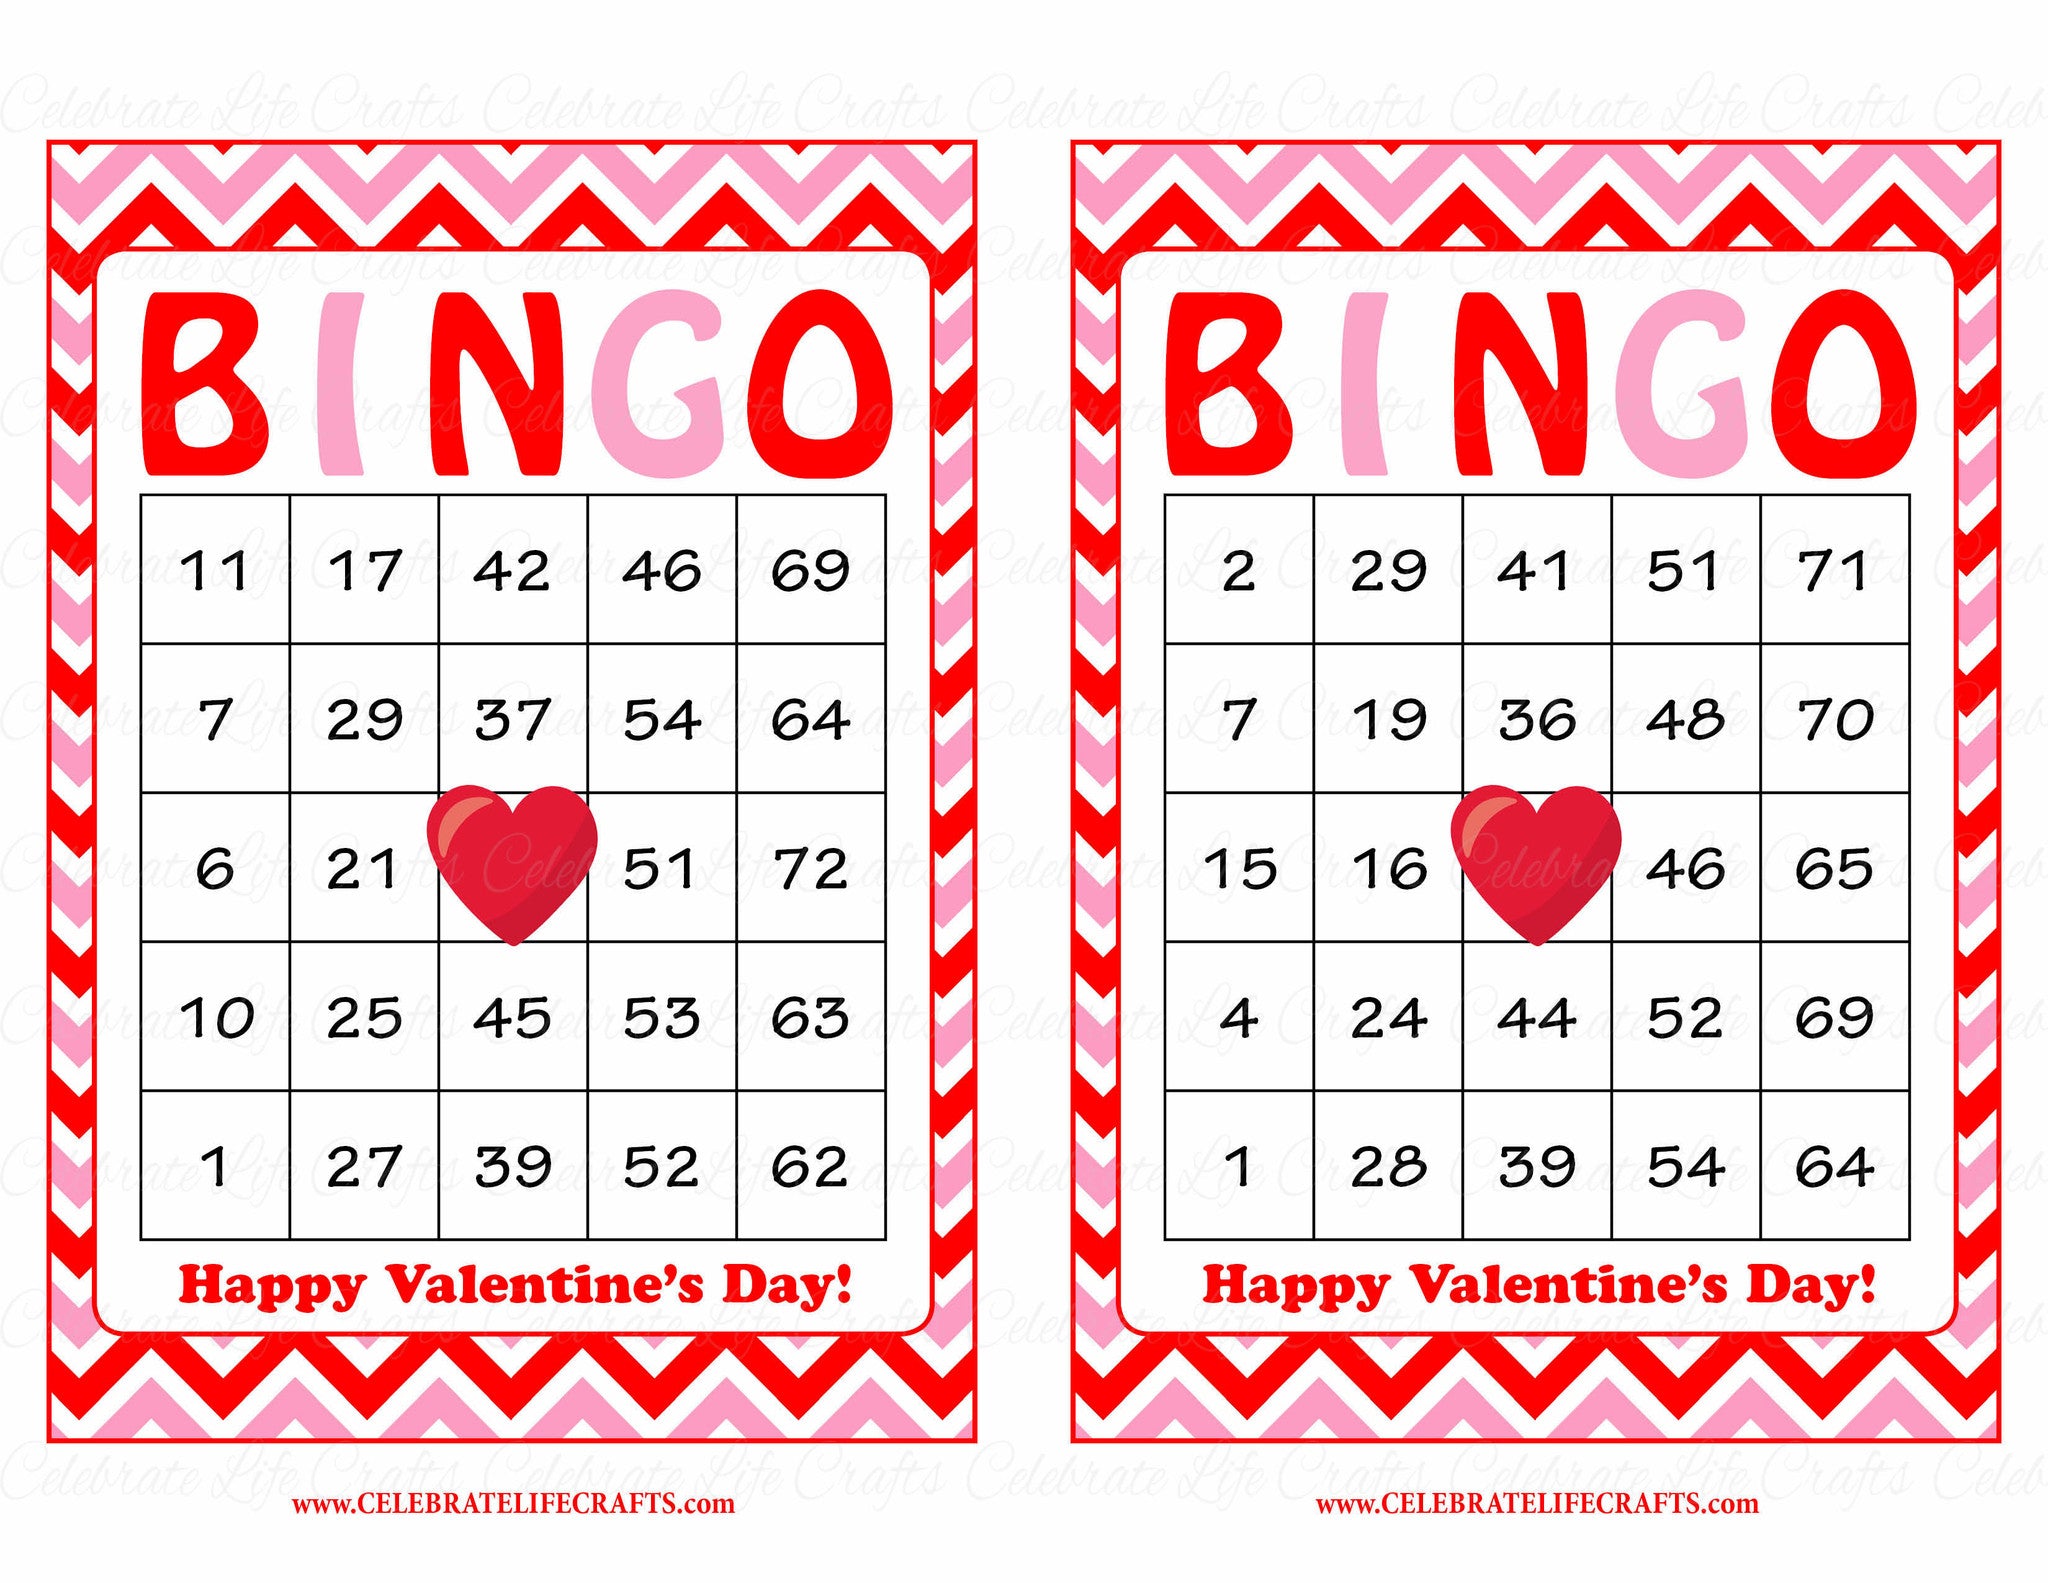 free-printable-valentine-s-day-bingo-game-crazy-little-projects